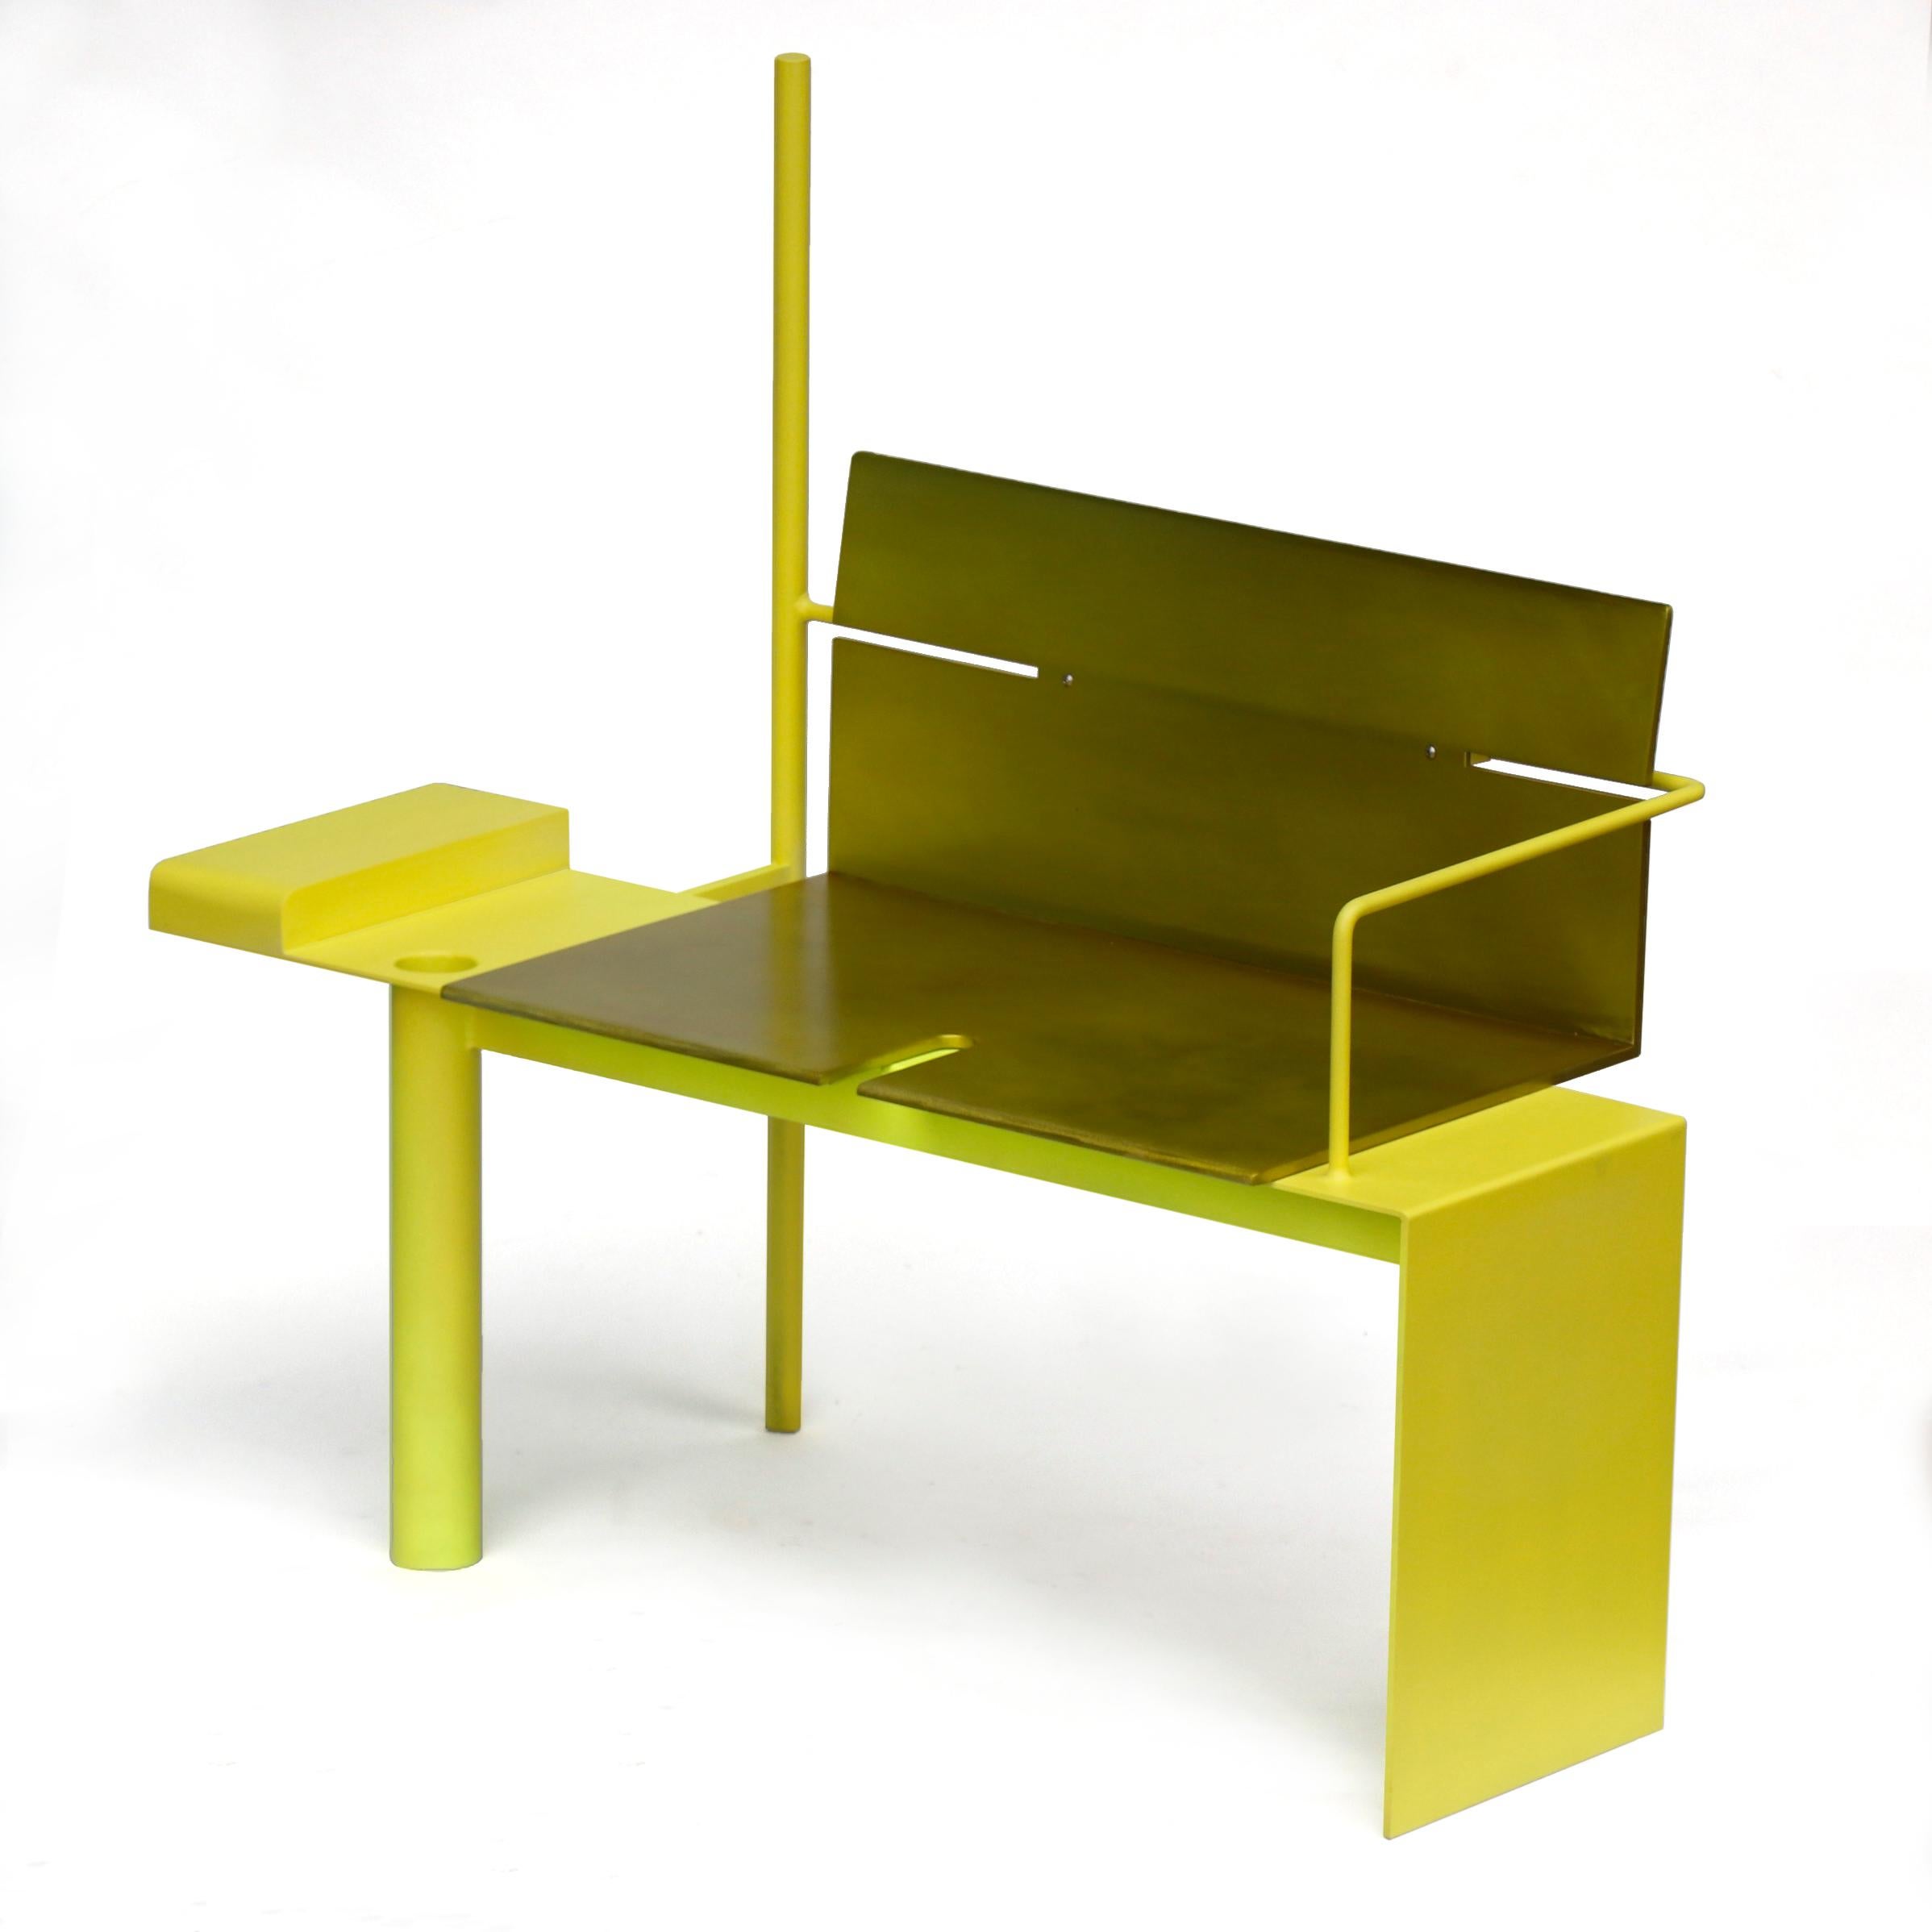 Minimalist sculptural bench/loveseat from steel and aluminum, painted in shifting green/yellow enamel and tinted yellow-green over aluminum. Piece is fabricated from solid steel plate/rod/flats and 3/8